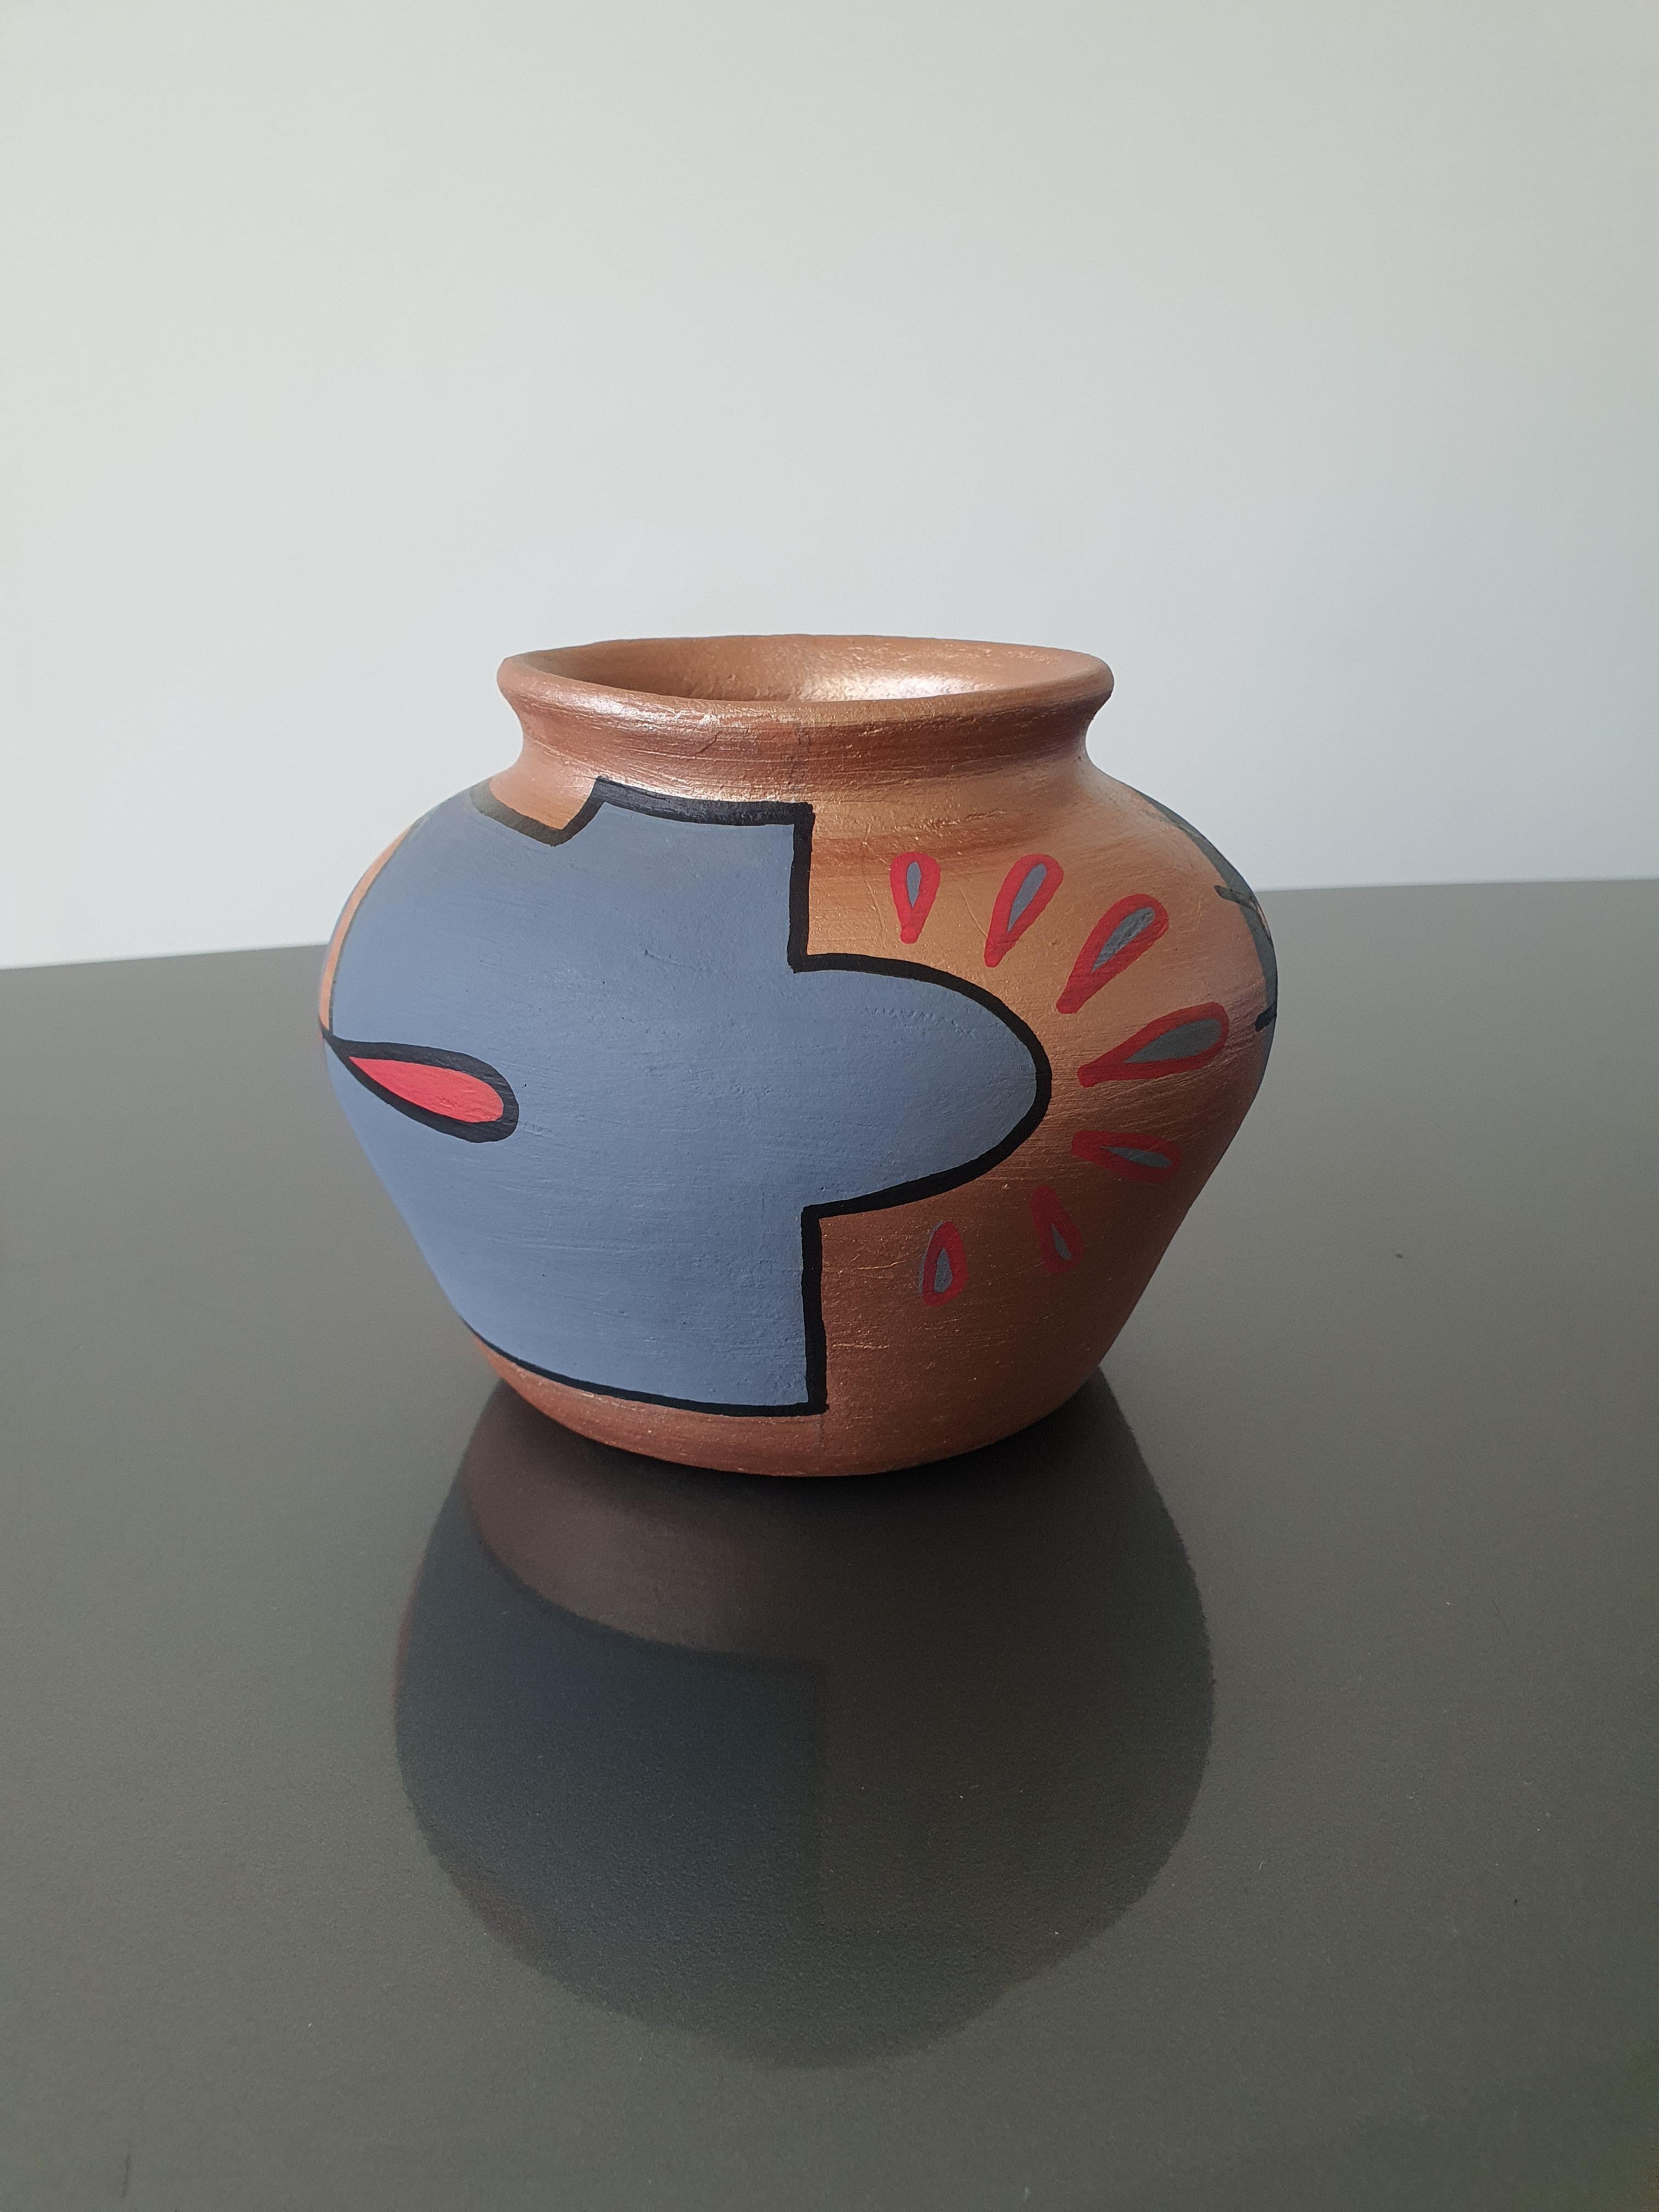 Intervention on lead-free clay pots is a project to enhance artisan work.

Silvino Lopeztovar
Born in Tlahuelilpan, Hidalgo, Mexico in 1970, Silvino Lopeztovar finished his professional design studies at the Universidad Nuevo Mundo in 1994. After